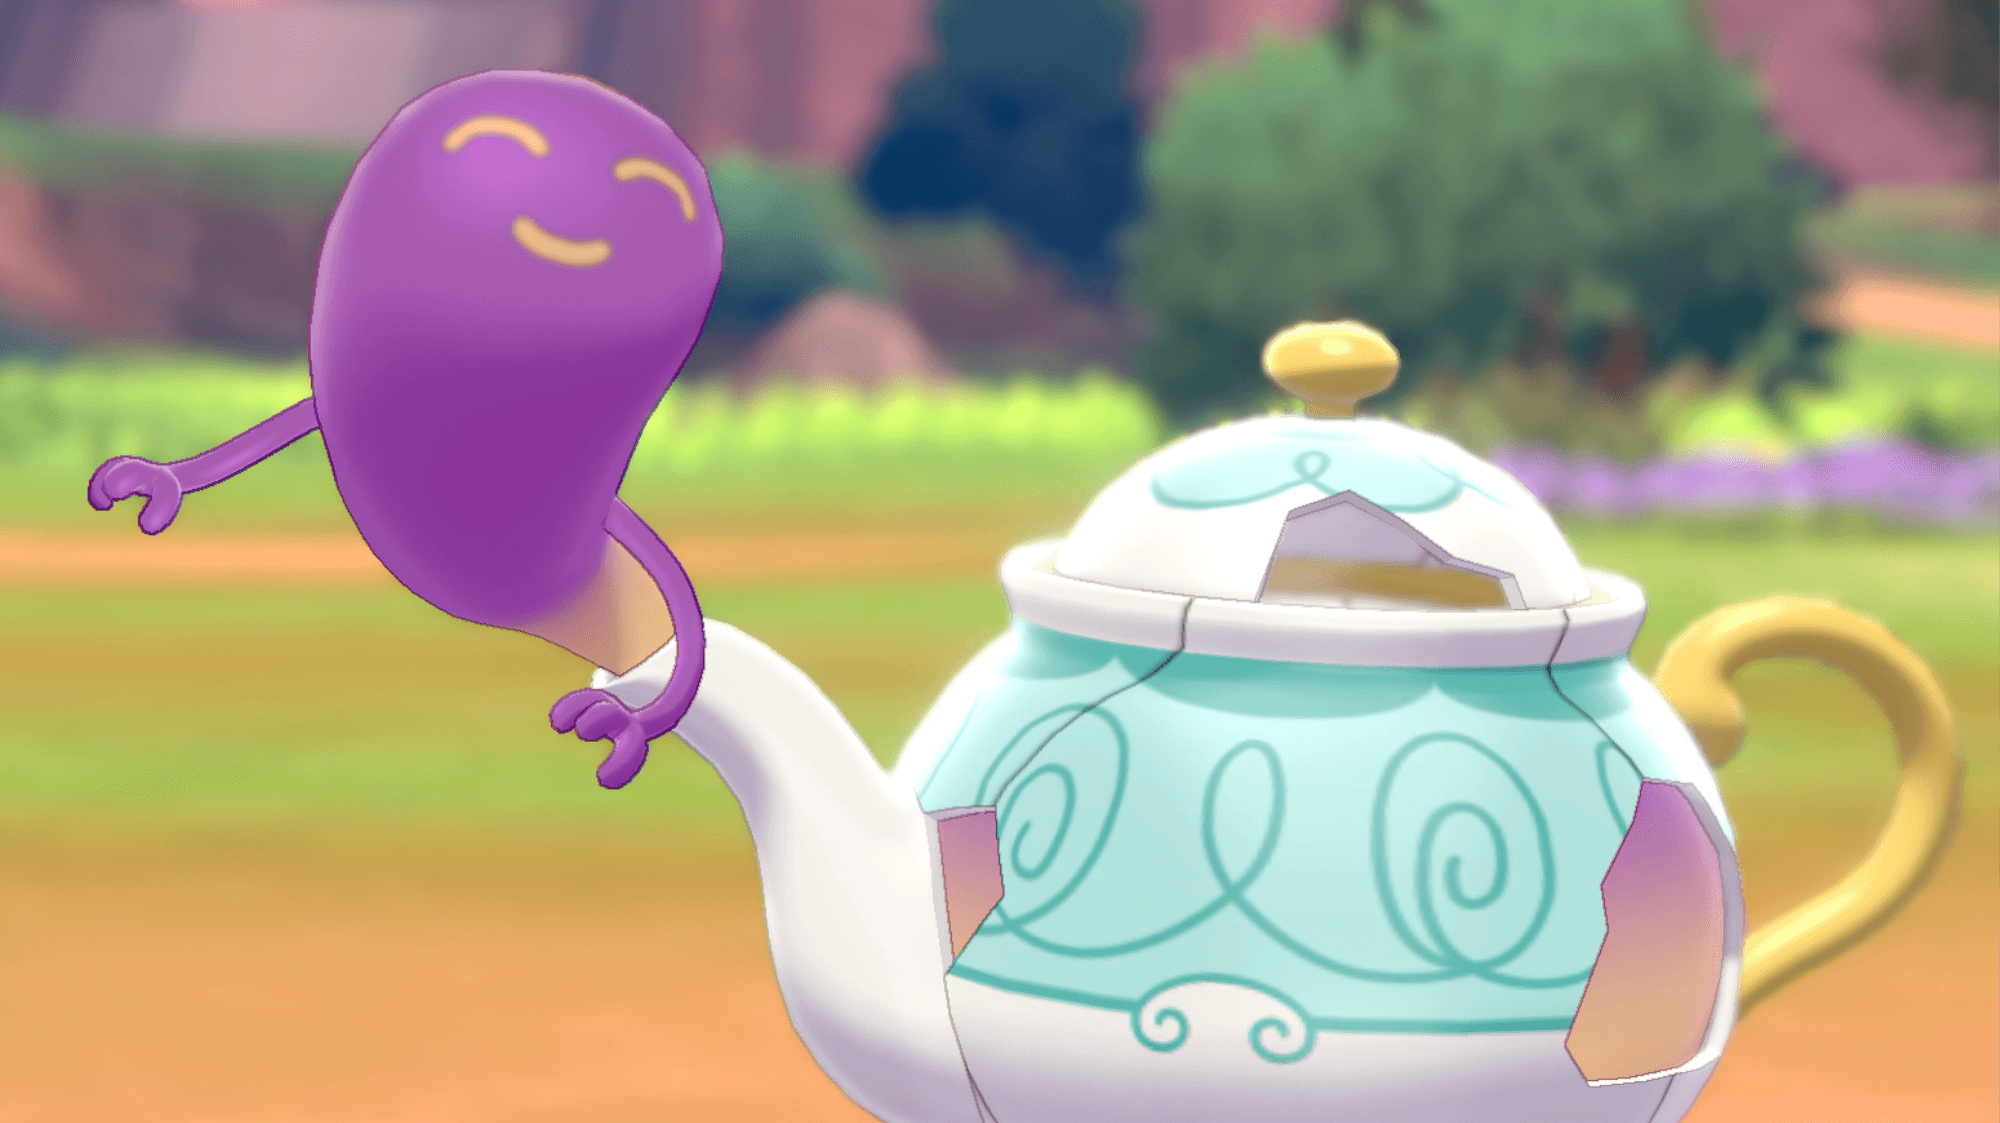 Polteageist, The Weird New Pokemon That You Can Drink, Is